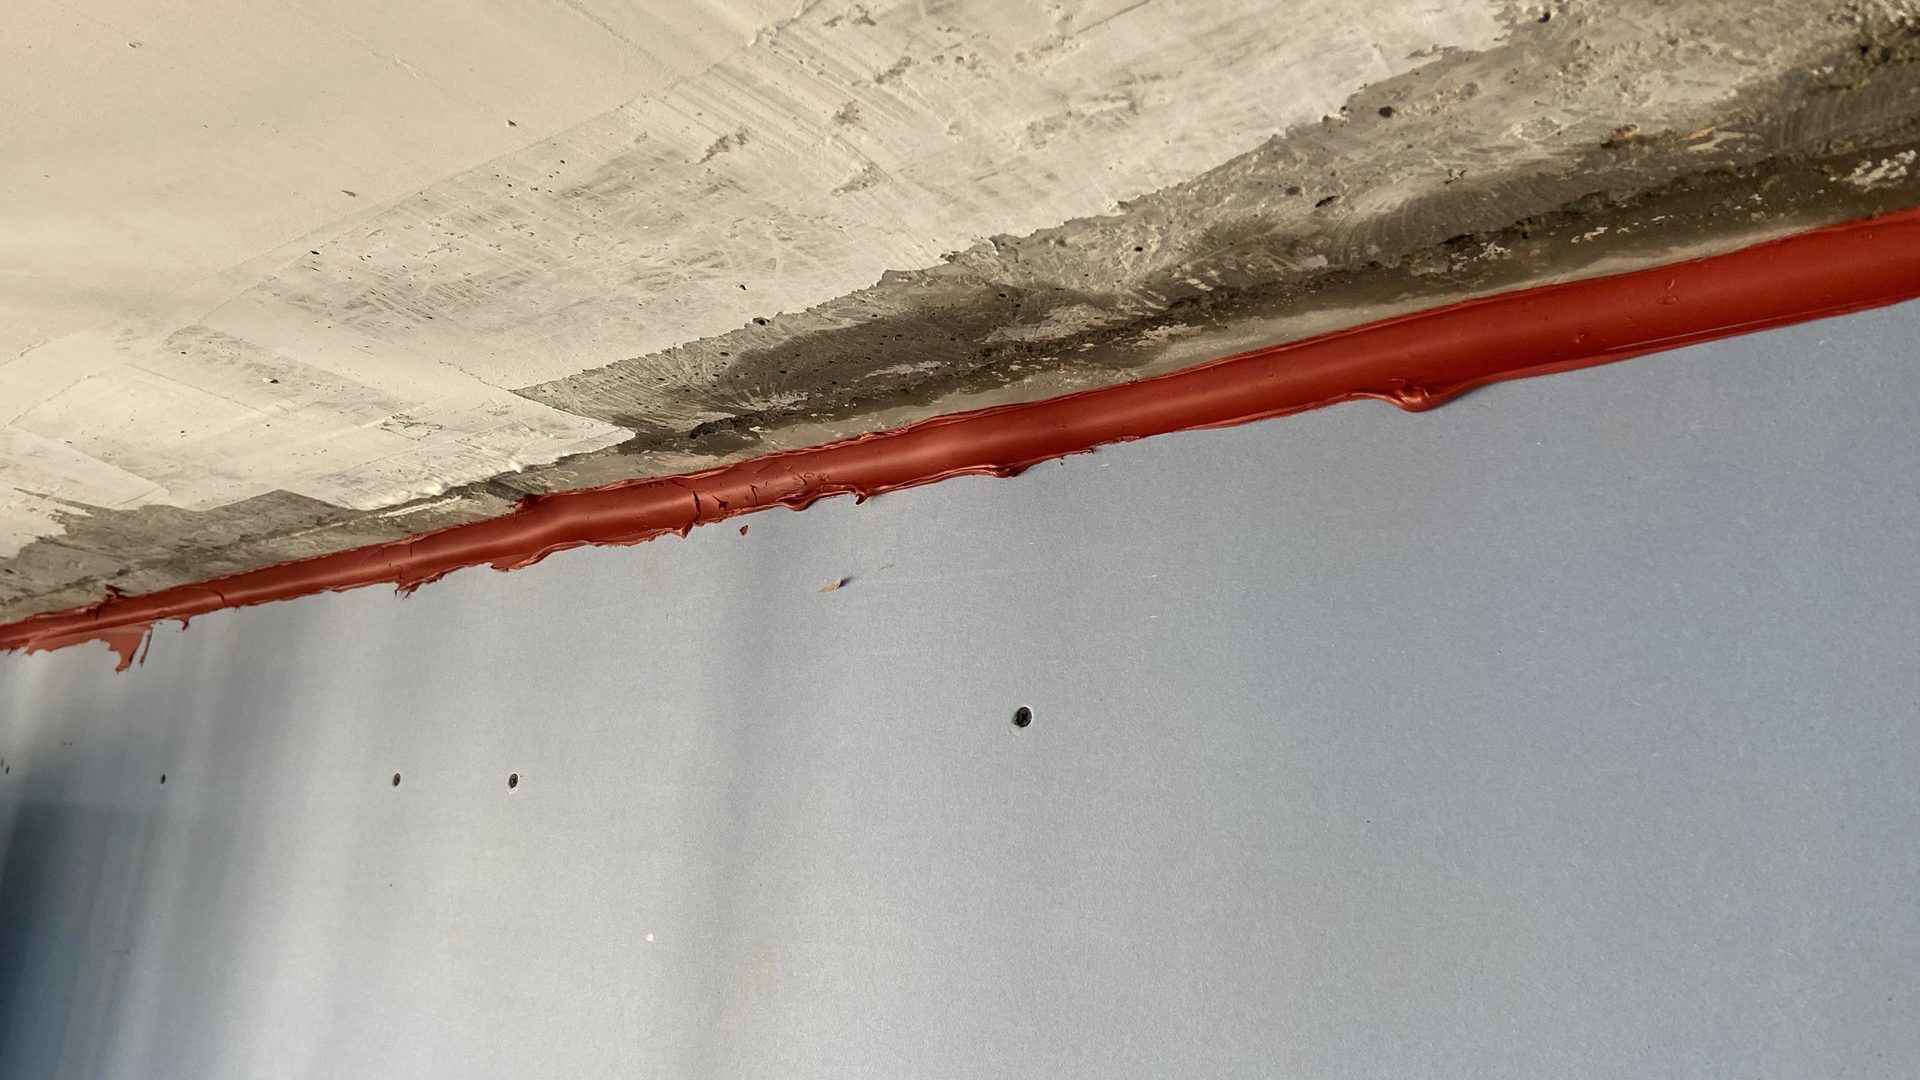 First-generation firestopping sealants applied to the top-of-wall